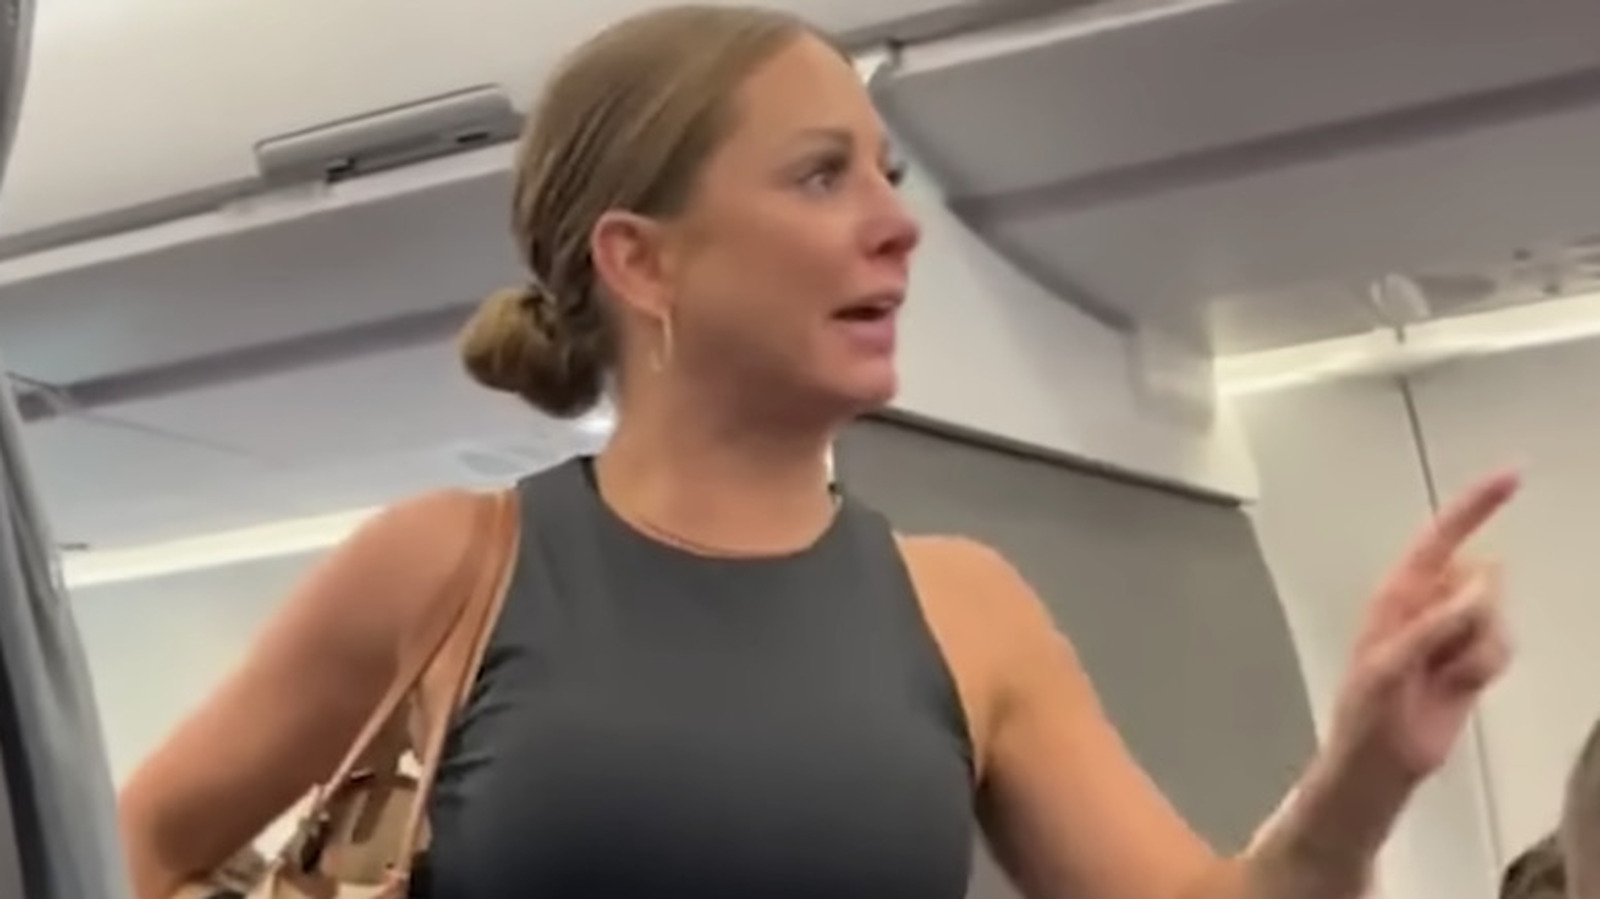 woman behind viral plane meltdown is an exec in real life